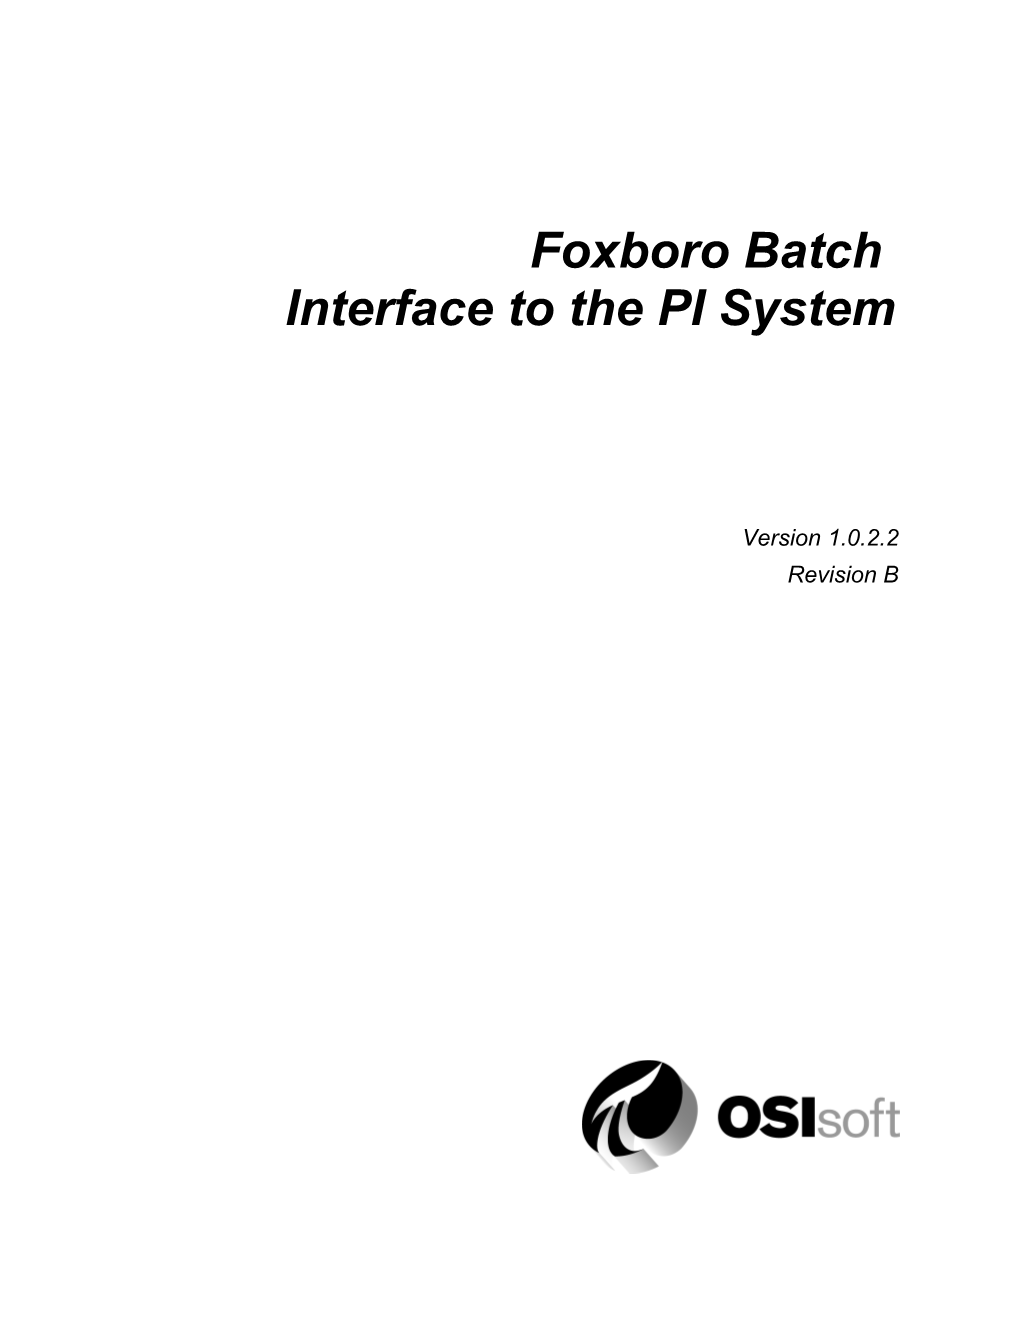 Foxboro Batch Interface to the PI System